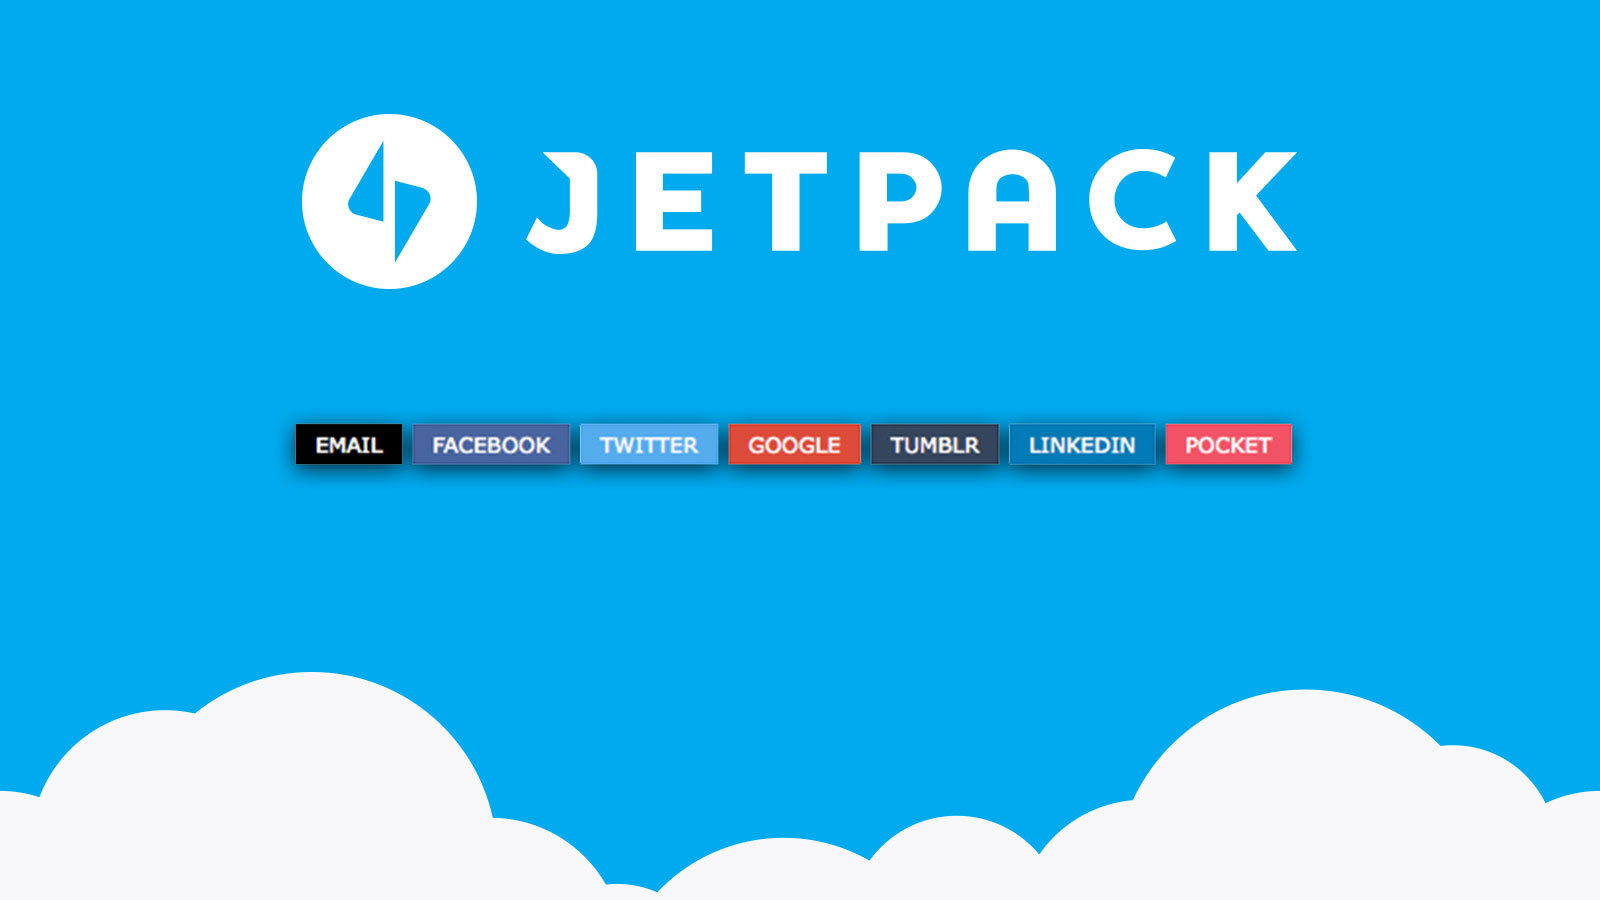 Customizing Jetpack Sharing Buttons